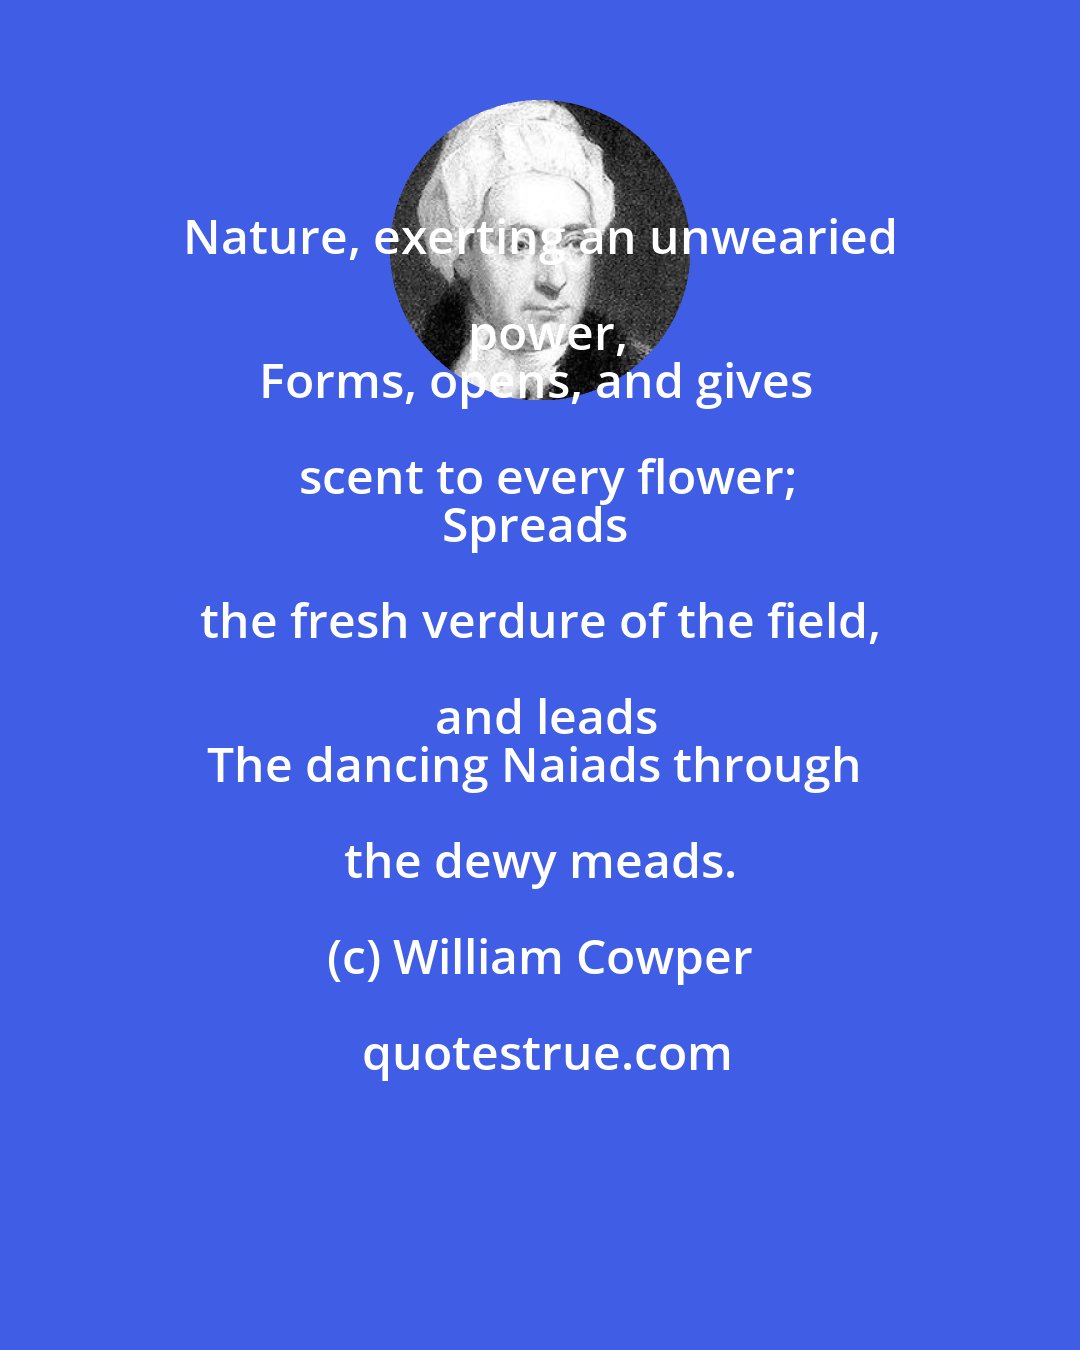 William Cowper: Nature, exerting an unwearied power,
Forms, opens, and gives scent to every flower;
Spreads the fresh verdure of the field, and leads
The dancing Naiads through the dewy meads.